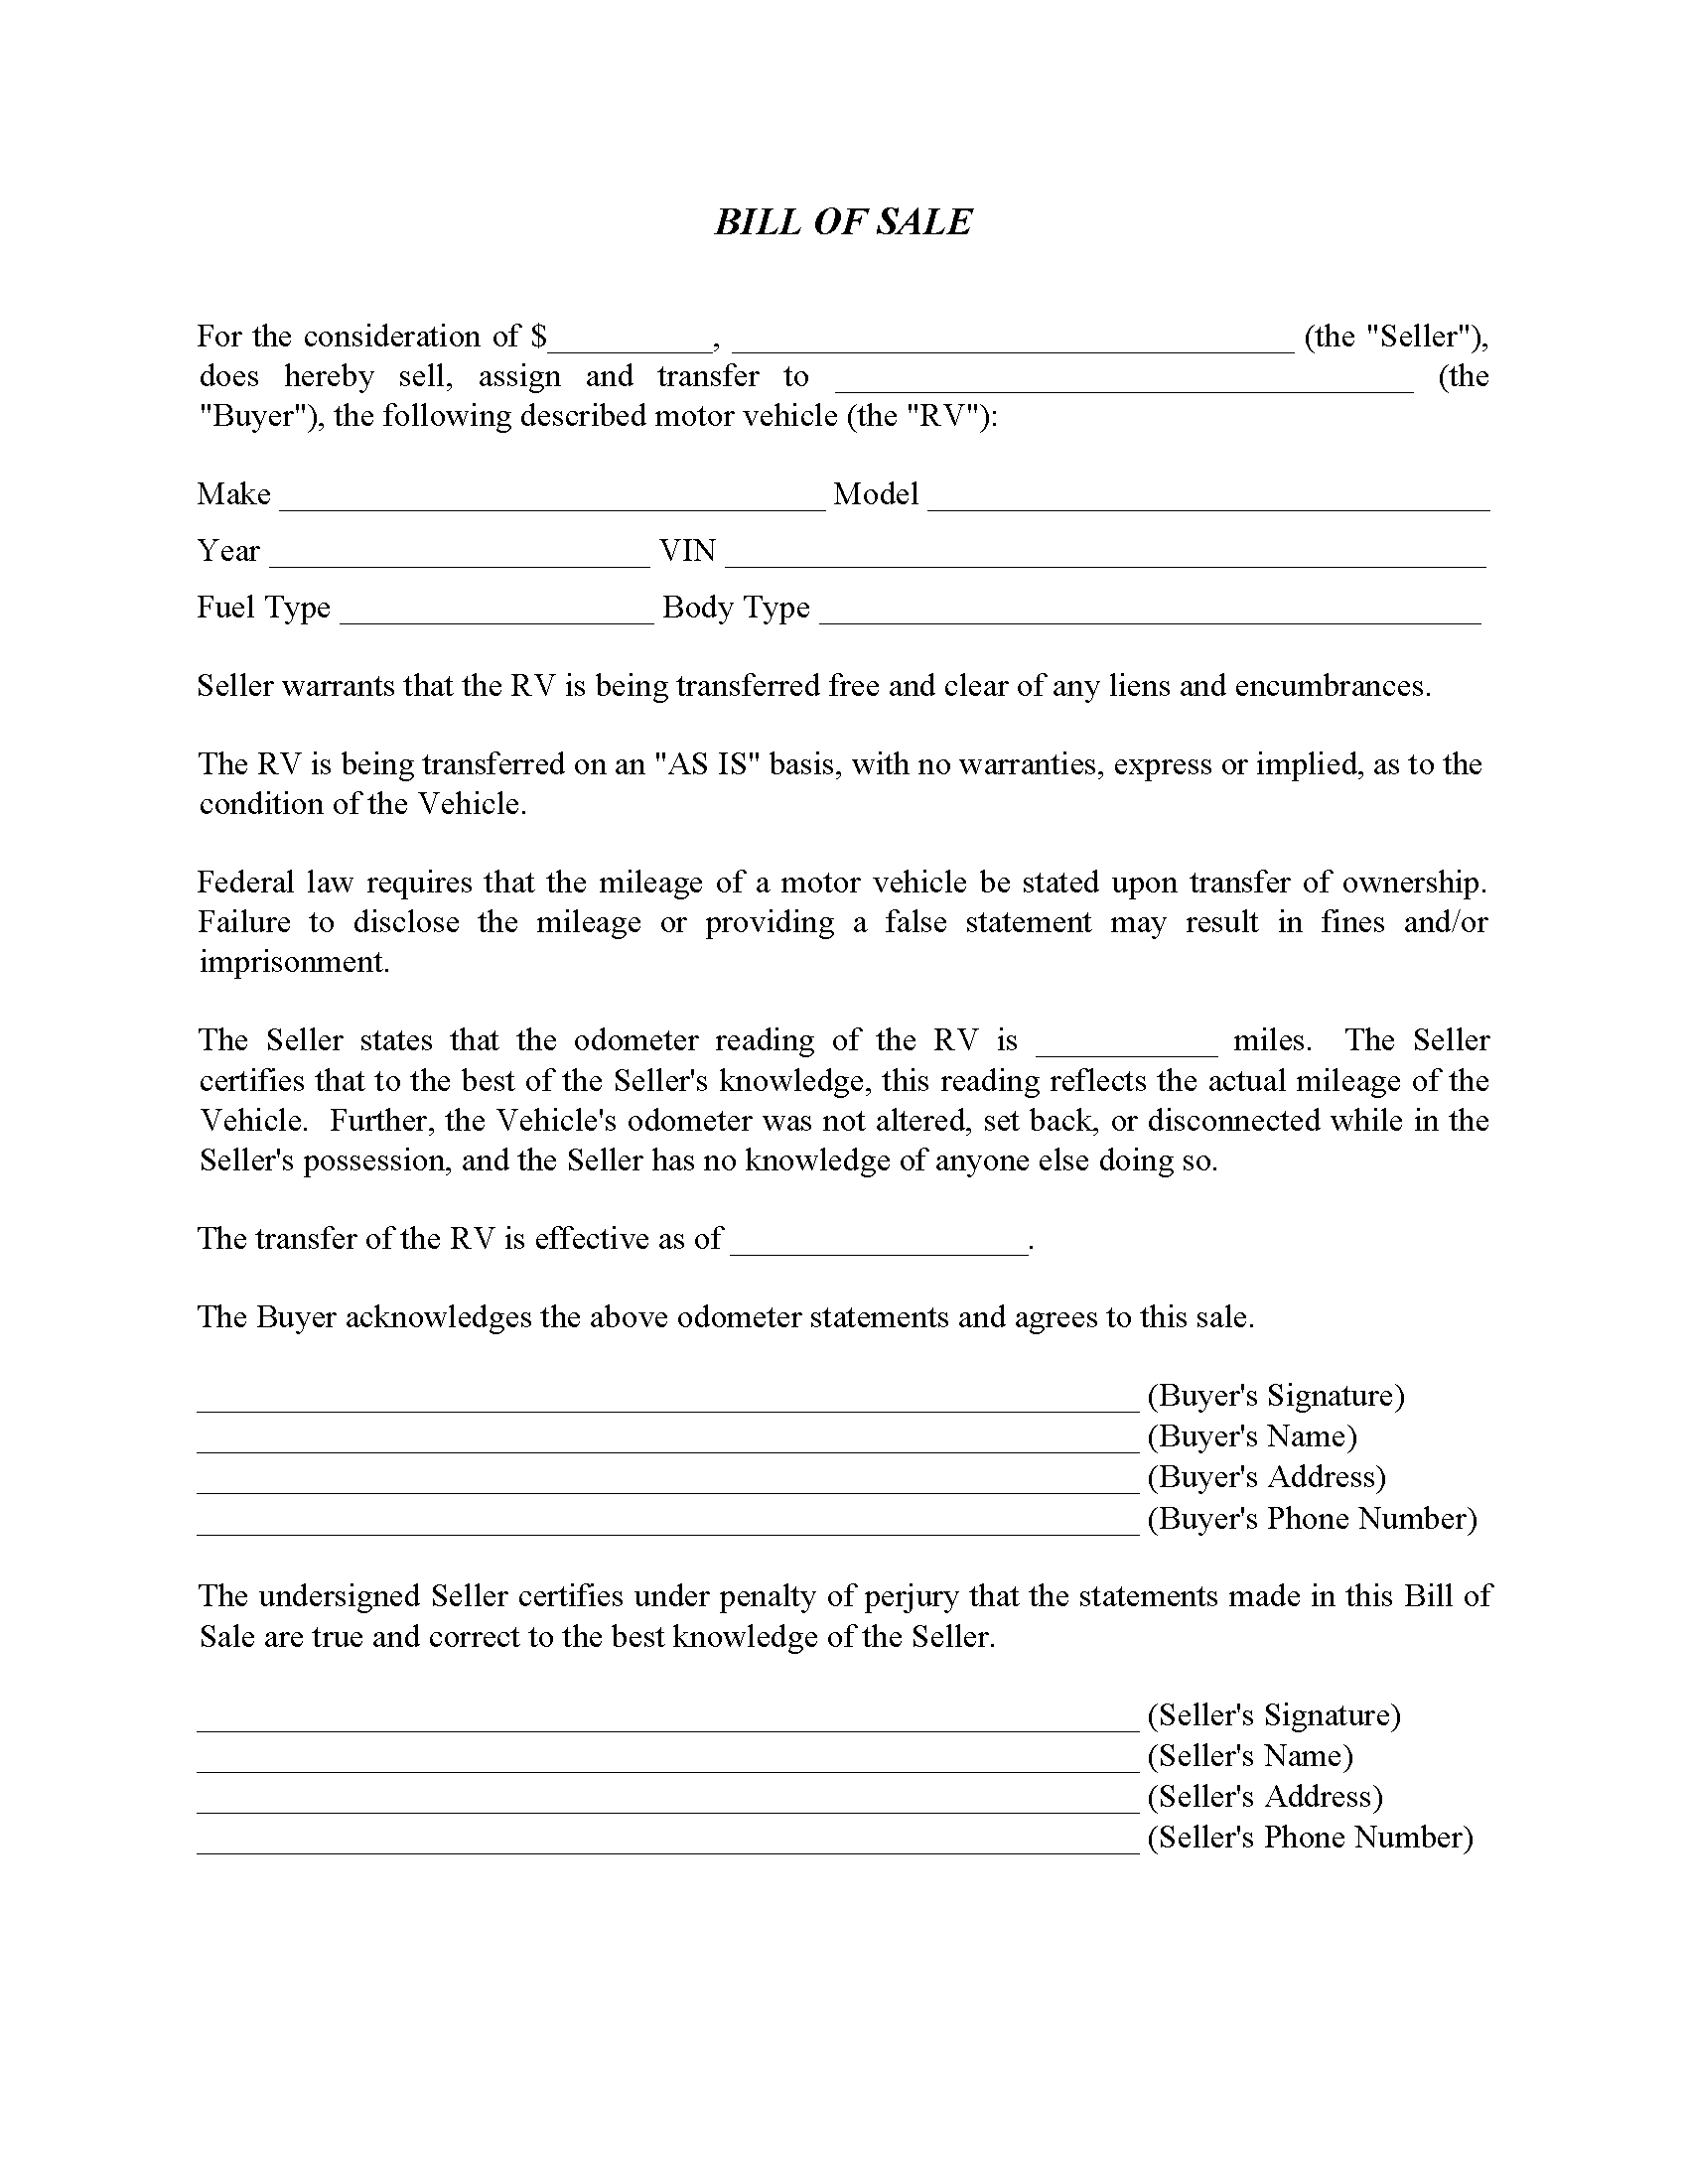 mississippi-rv-bill-of-sale-form-free-printable-legal-forms